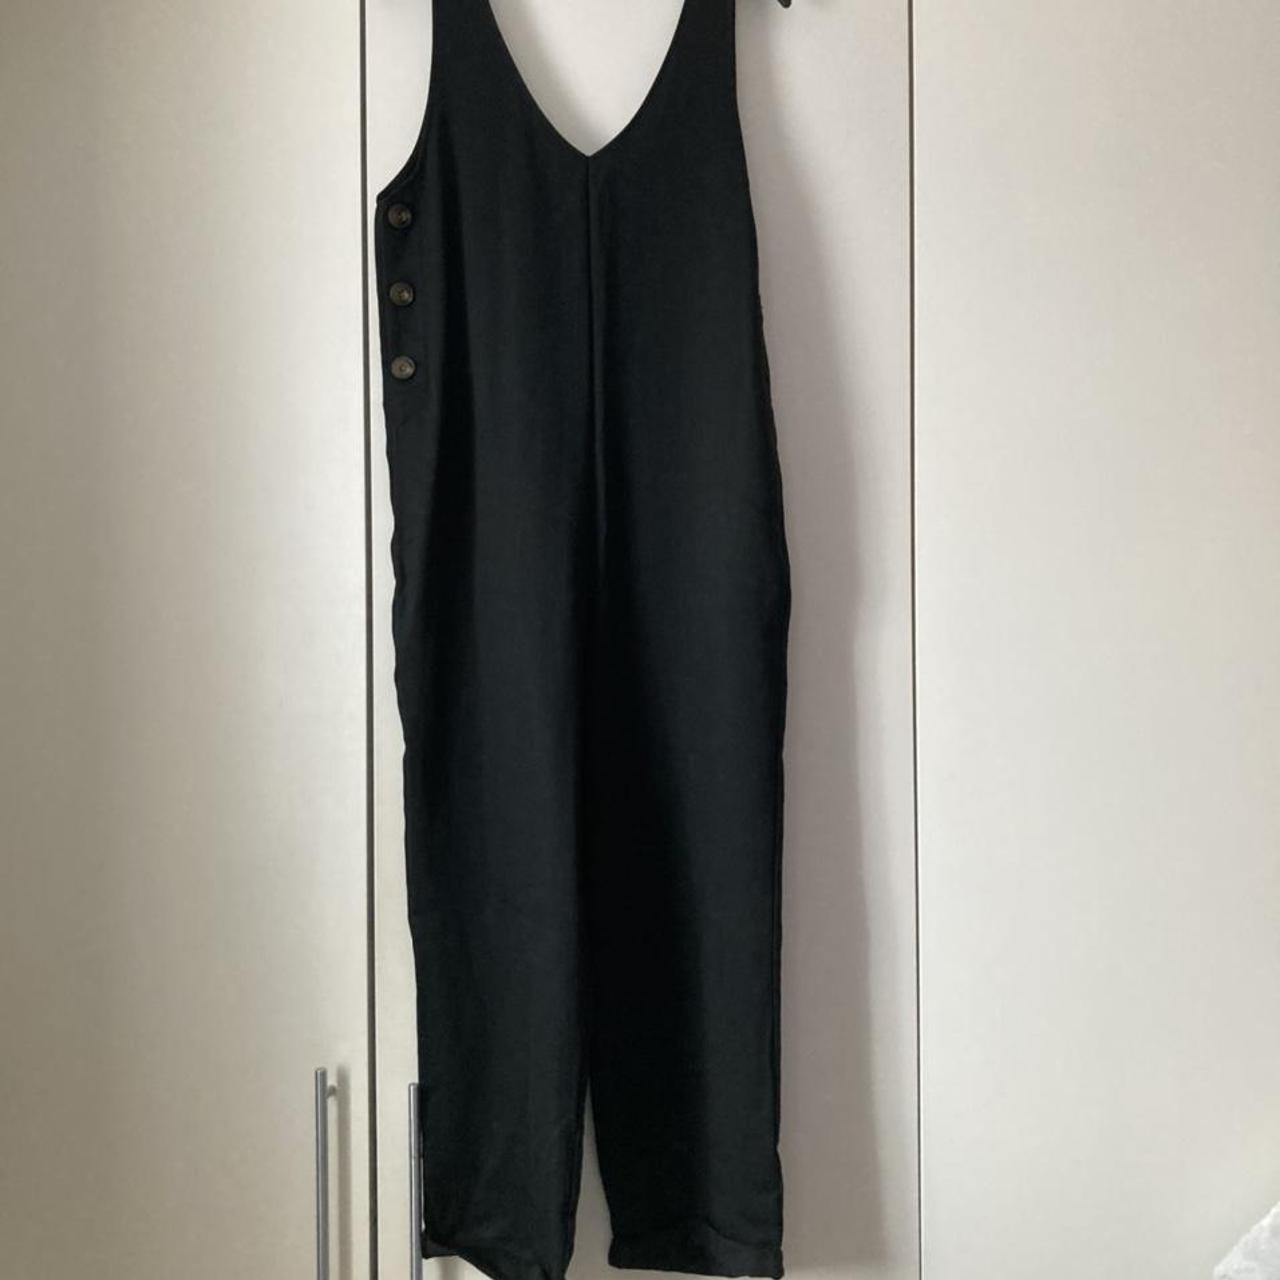 Product Image 4 - Topshop jumpsuit/dungarees, with buttons. 

-Black
-size